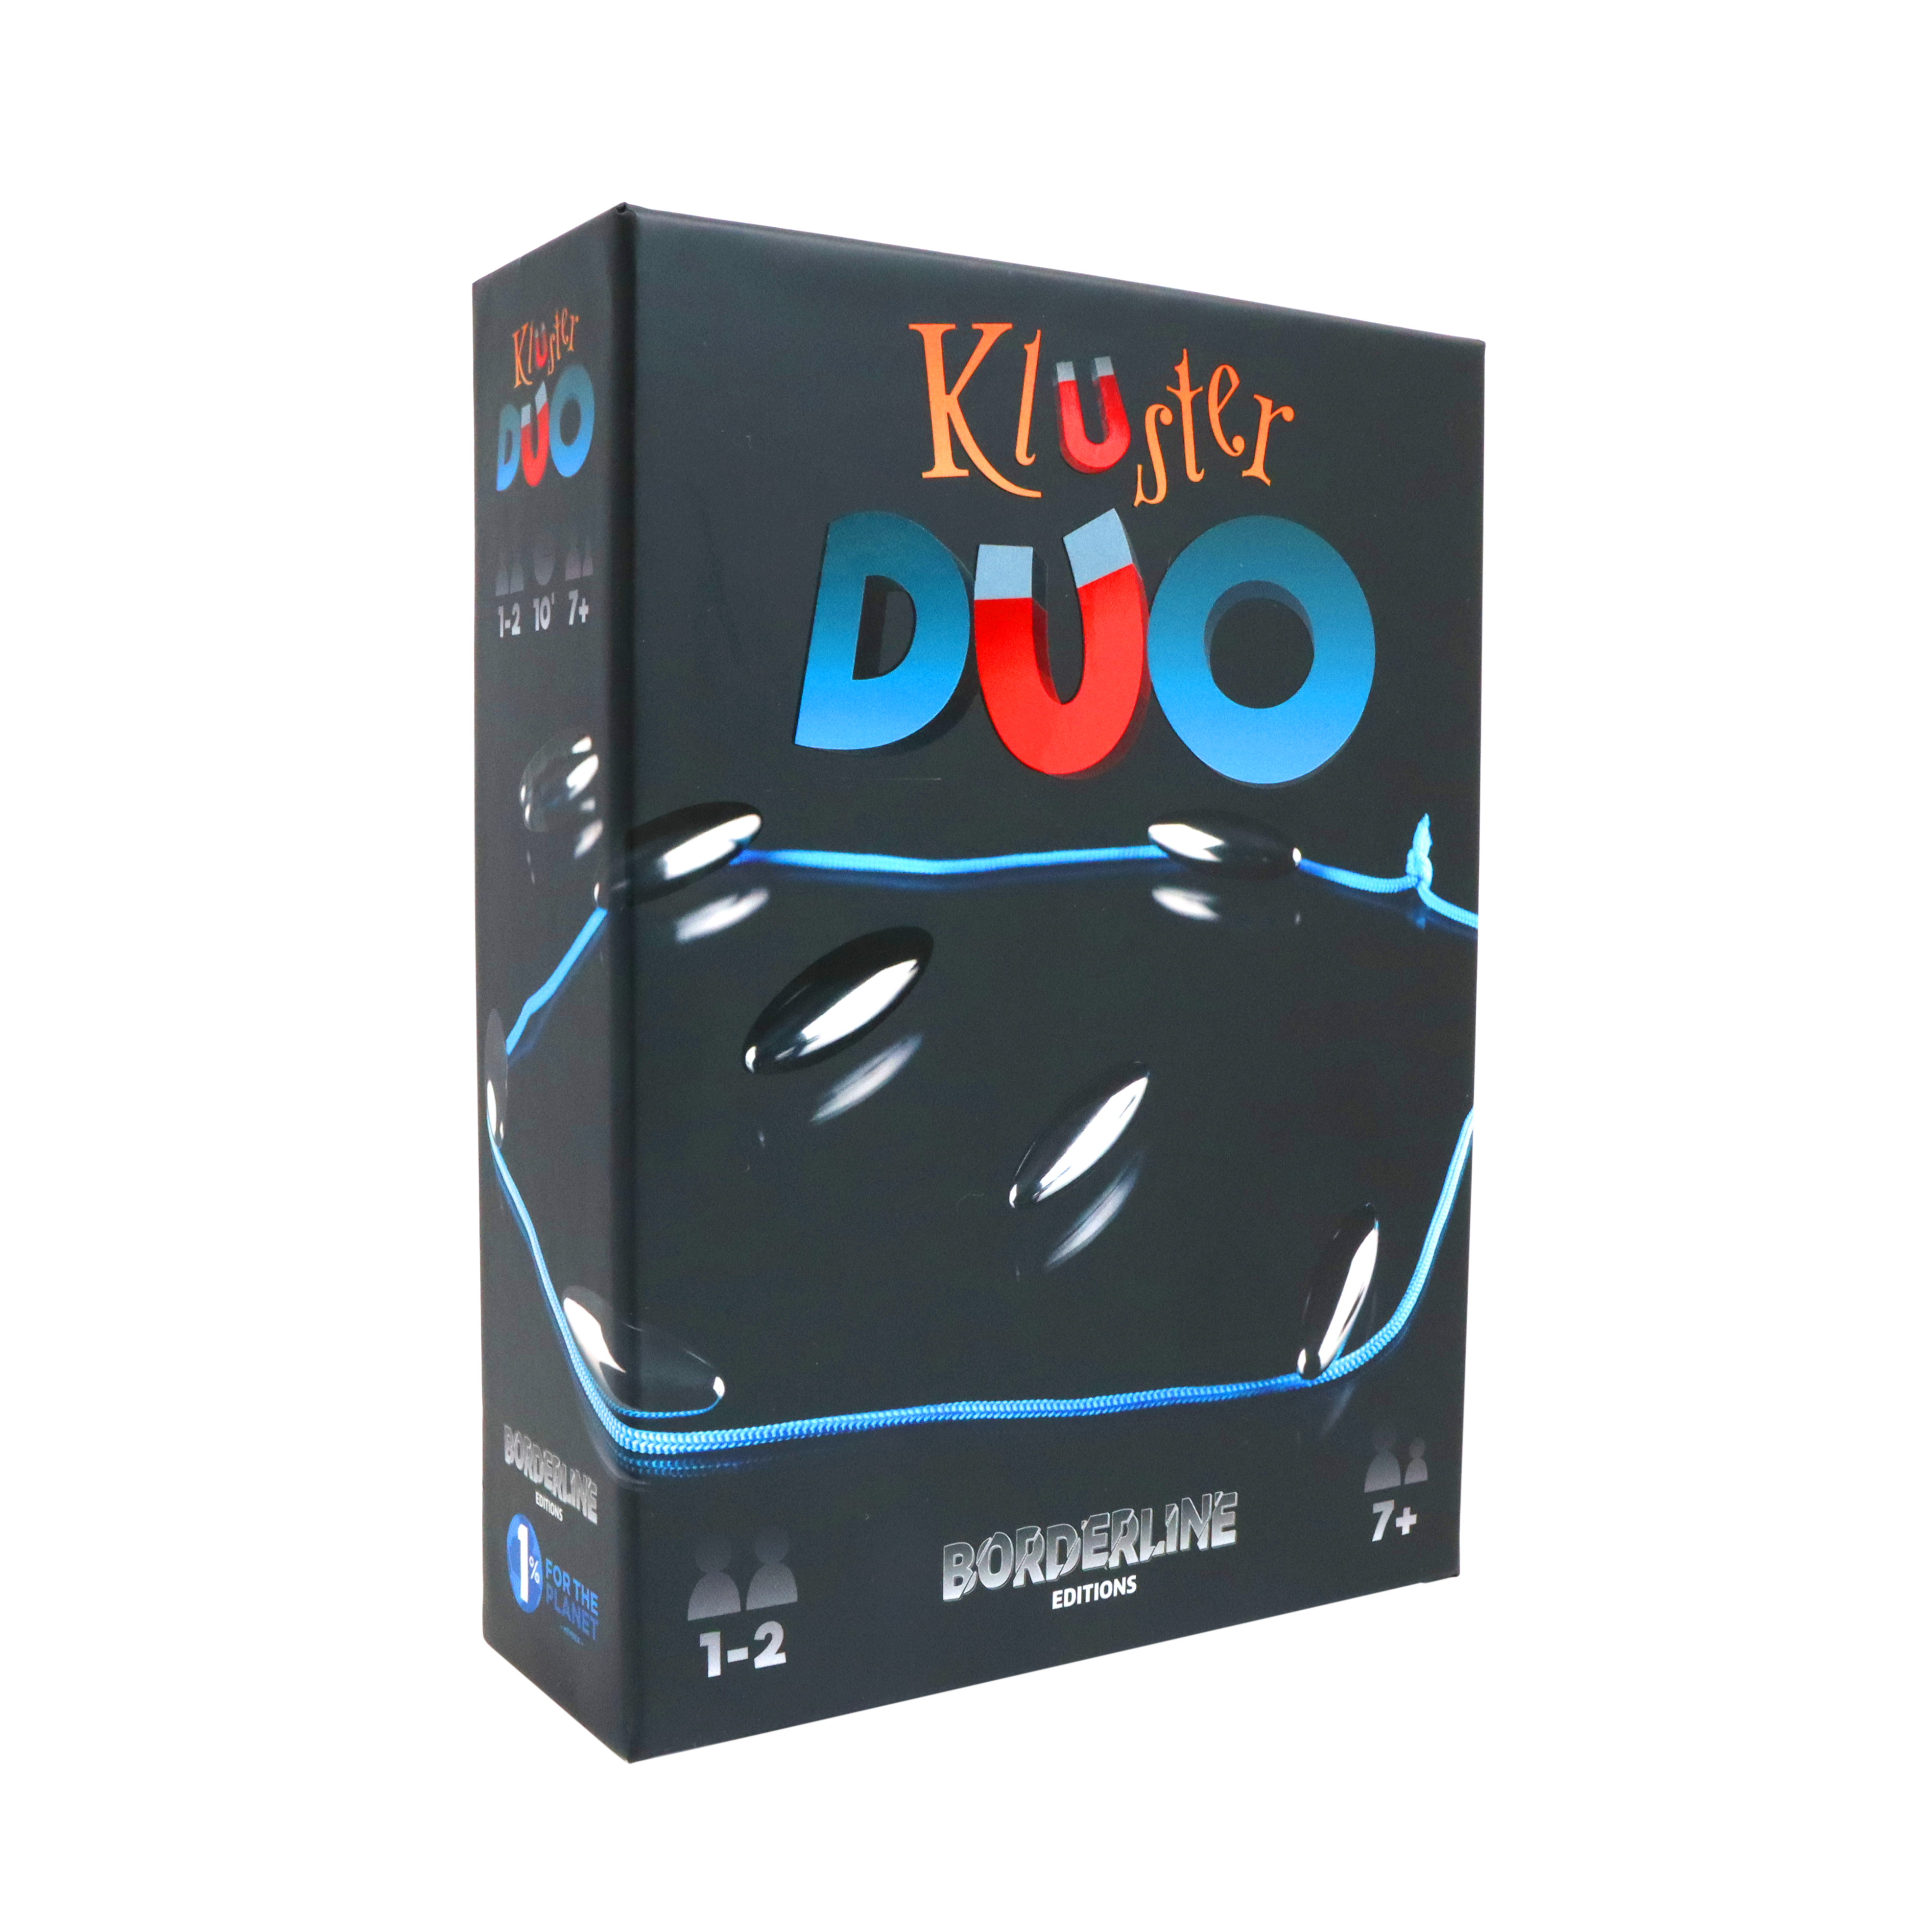 Kluster Duo_FRONT OF BOX V1.png__PID:113b7f81-130d-4753-9693-3d0004aaba6f